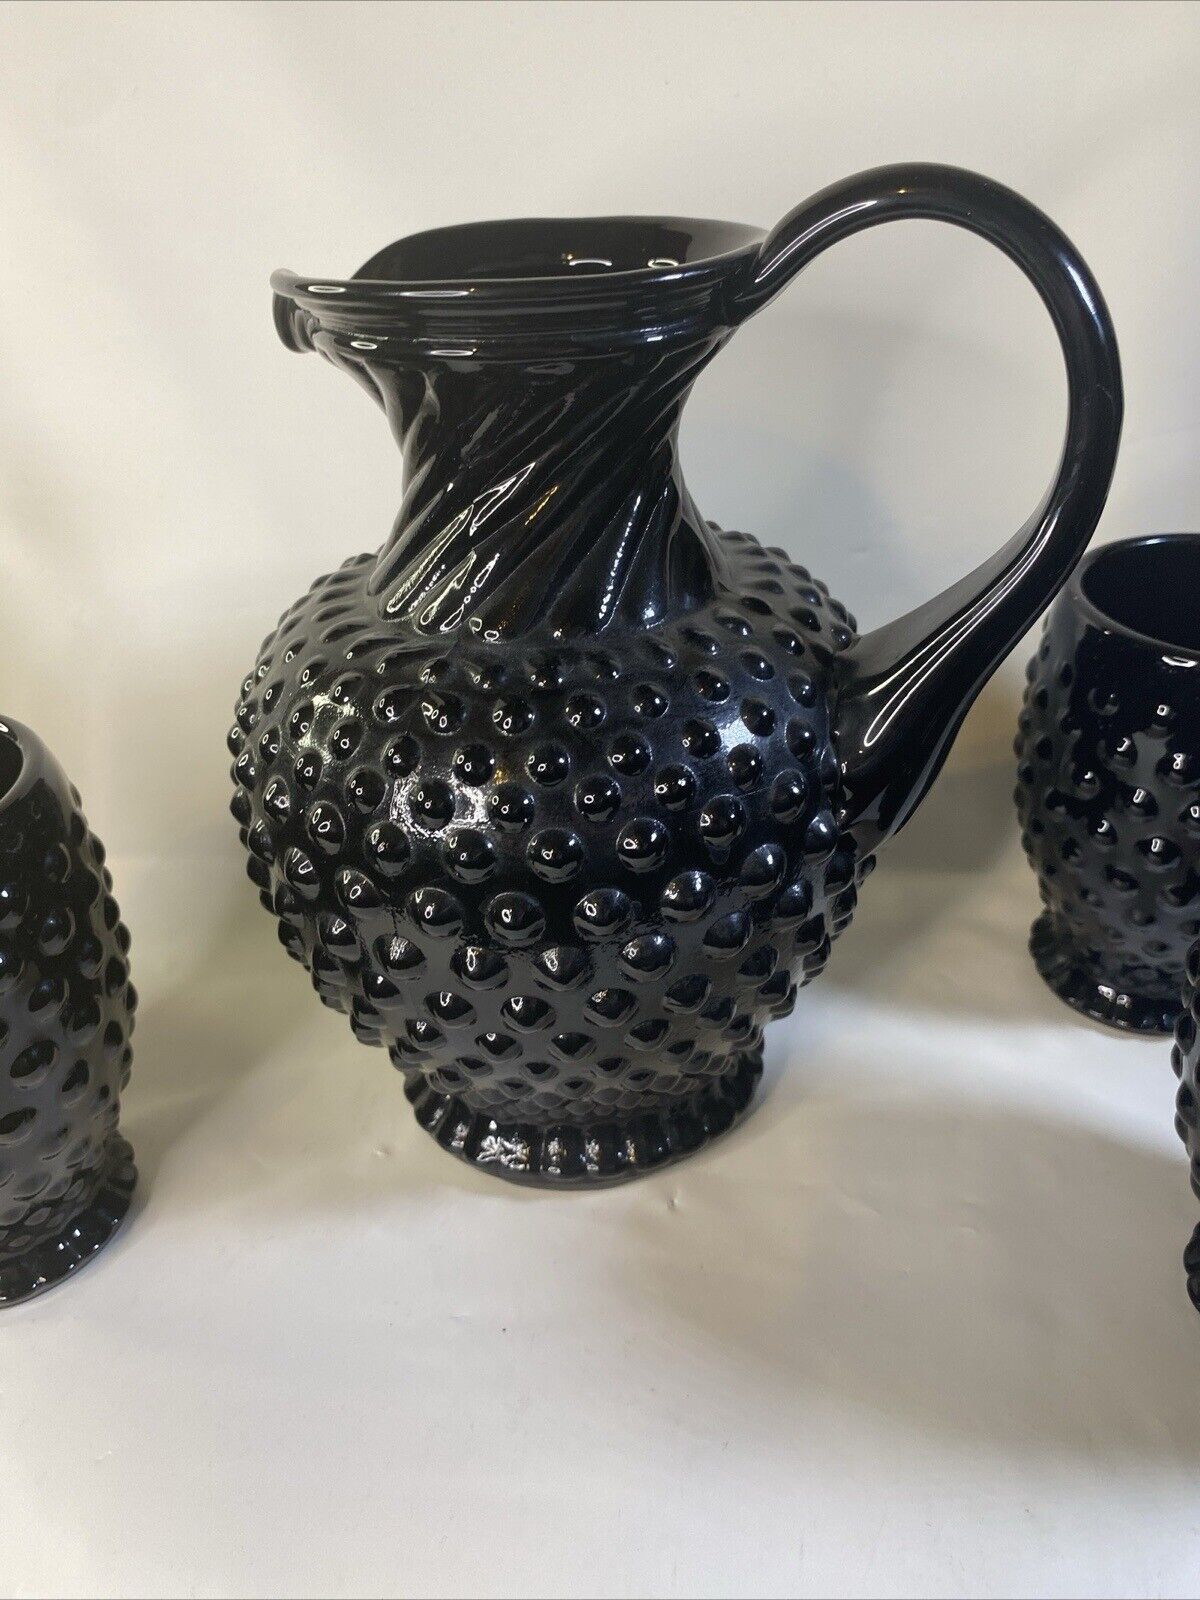 Tiara Hobnail Black Pitcher with 4 Glasses Tumblers Textured Glossy Vintage